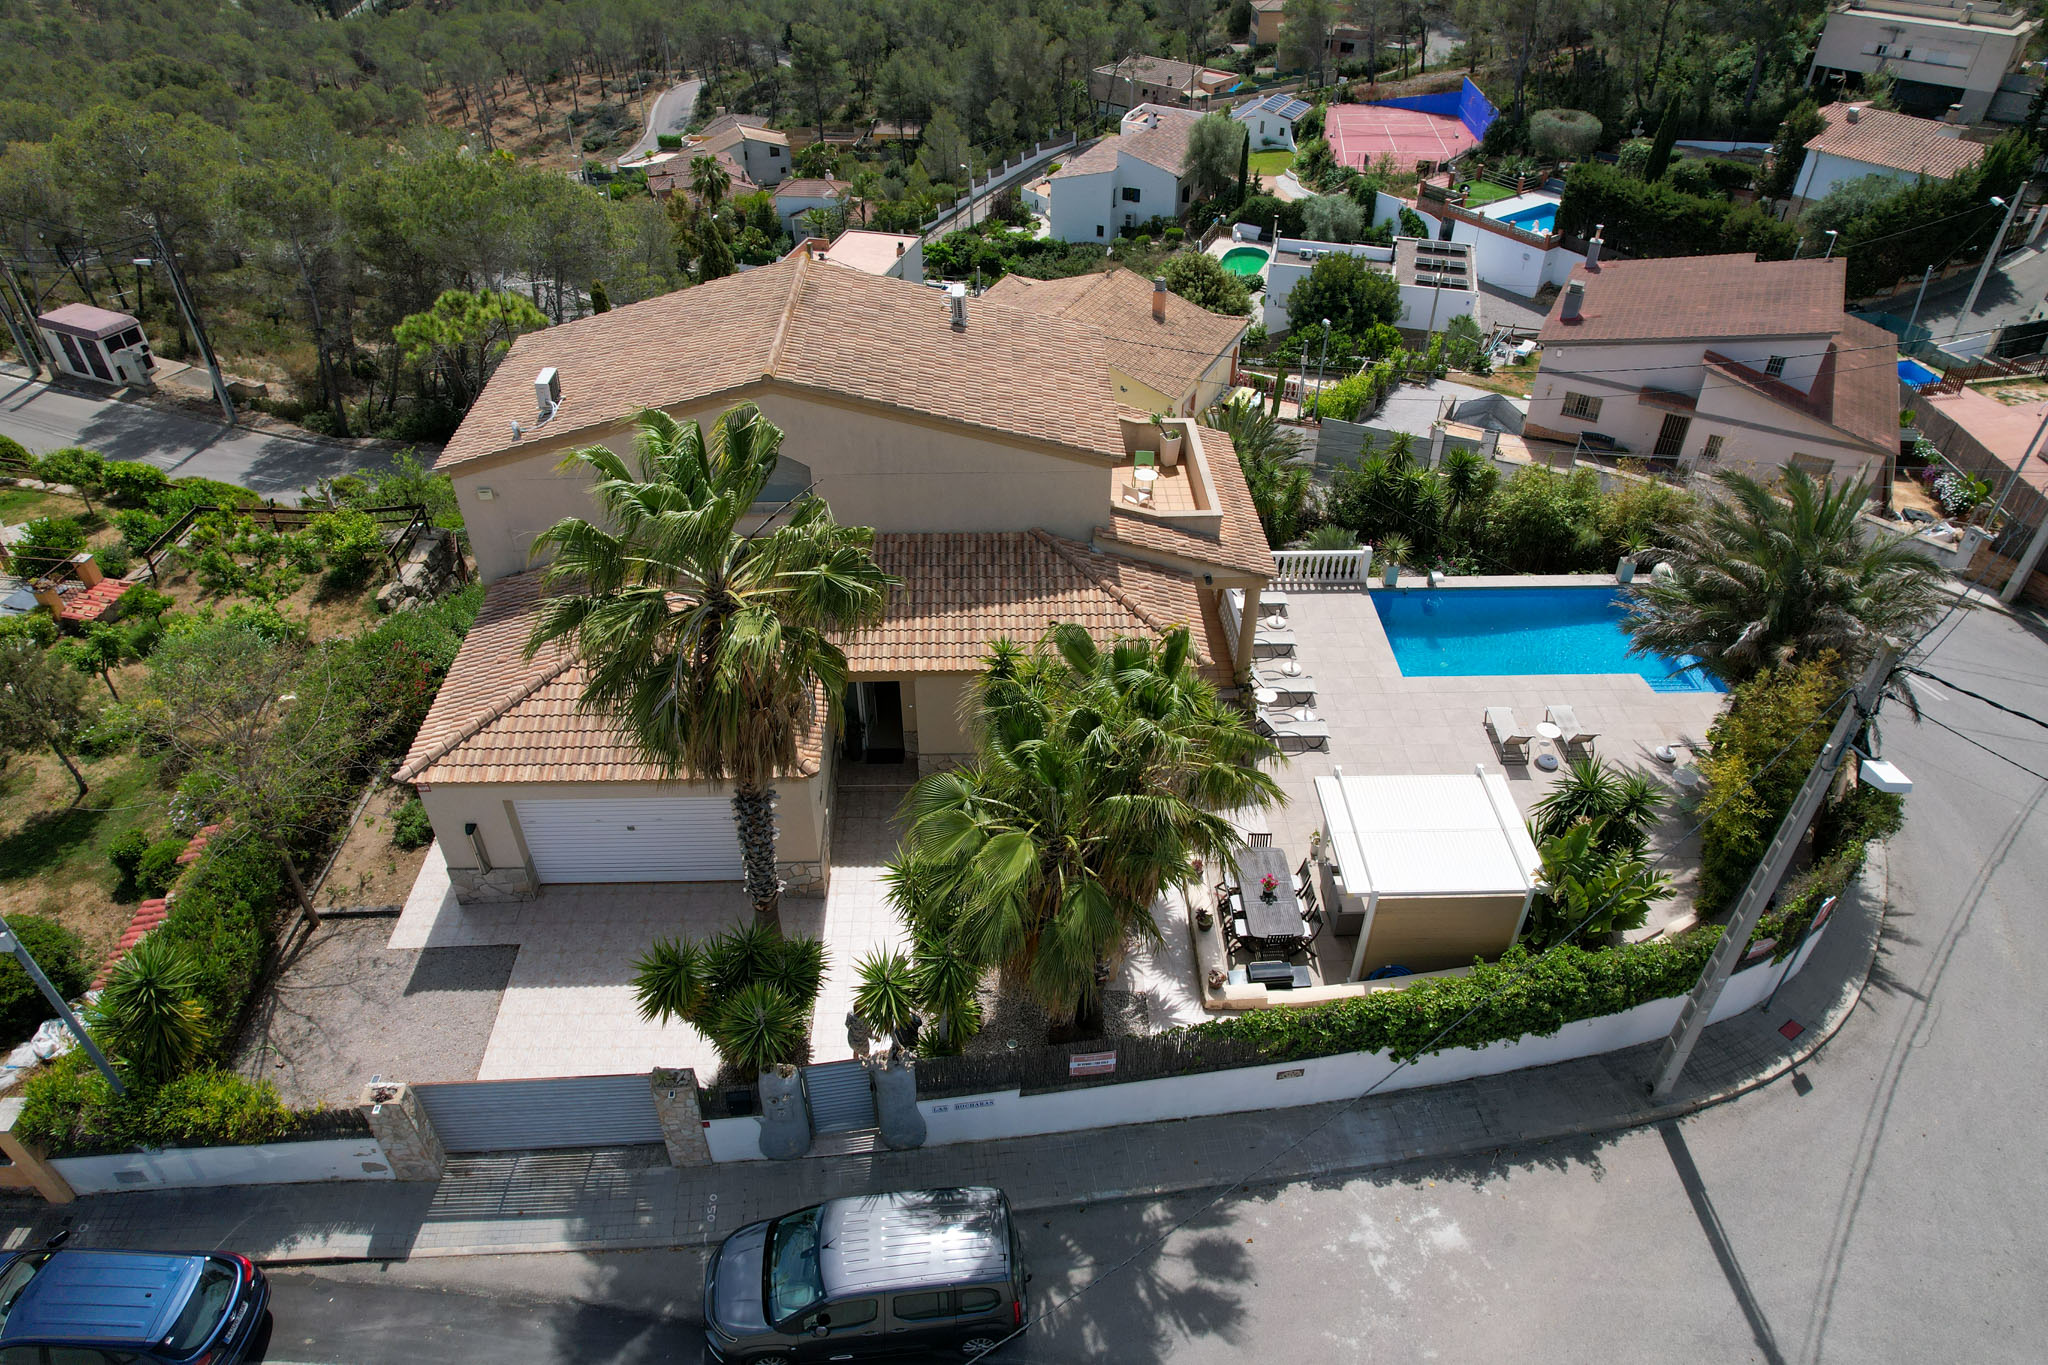 Villa in the Sitges hills with great views, no stairs